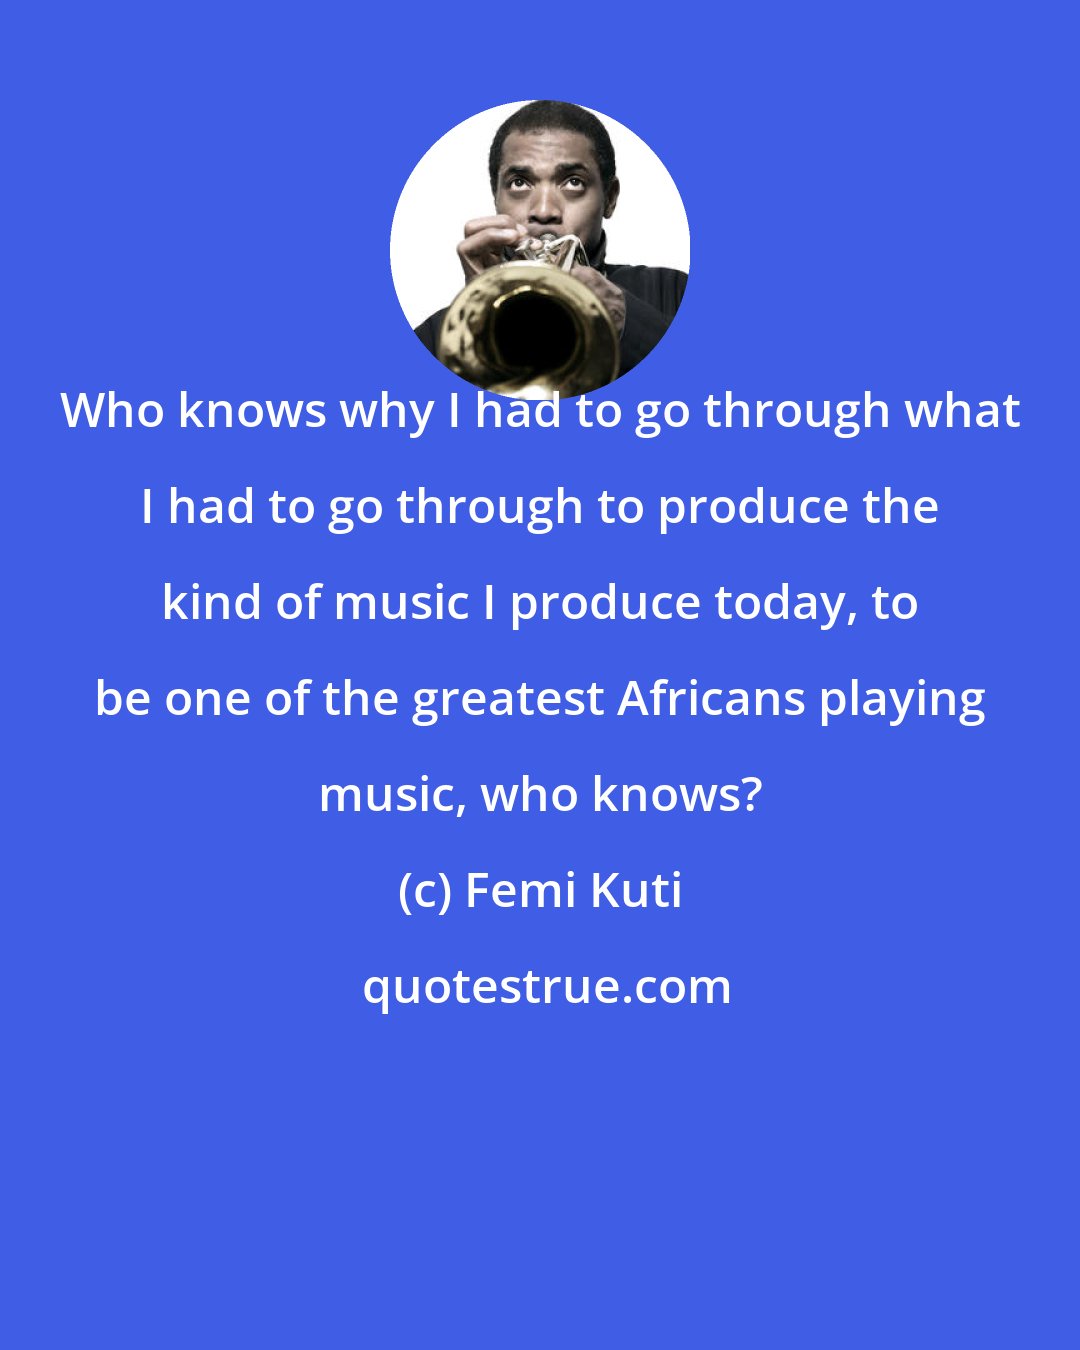 Femi Kuti: Who knows why I had to go through what I had to go through to produce the kind of music I produce today, to be one of the greatest Africans playing music, who knows?